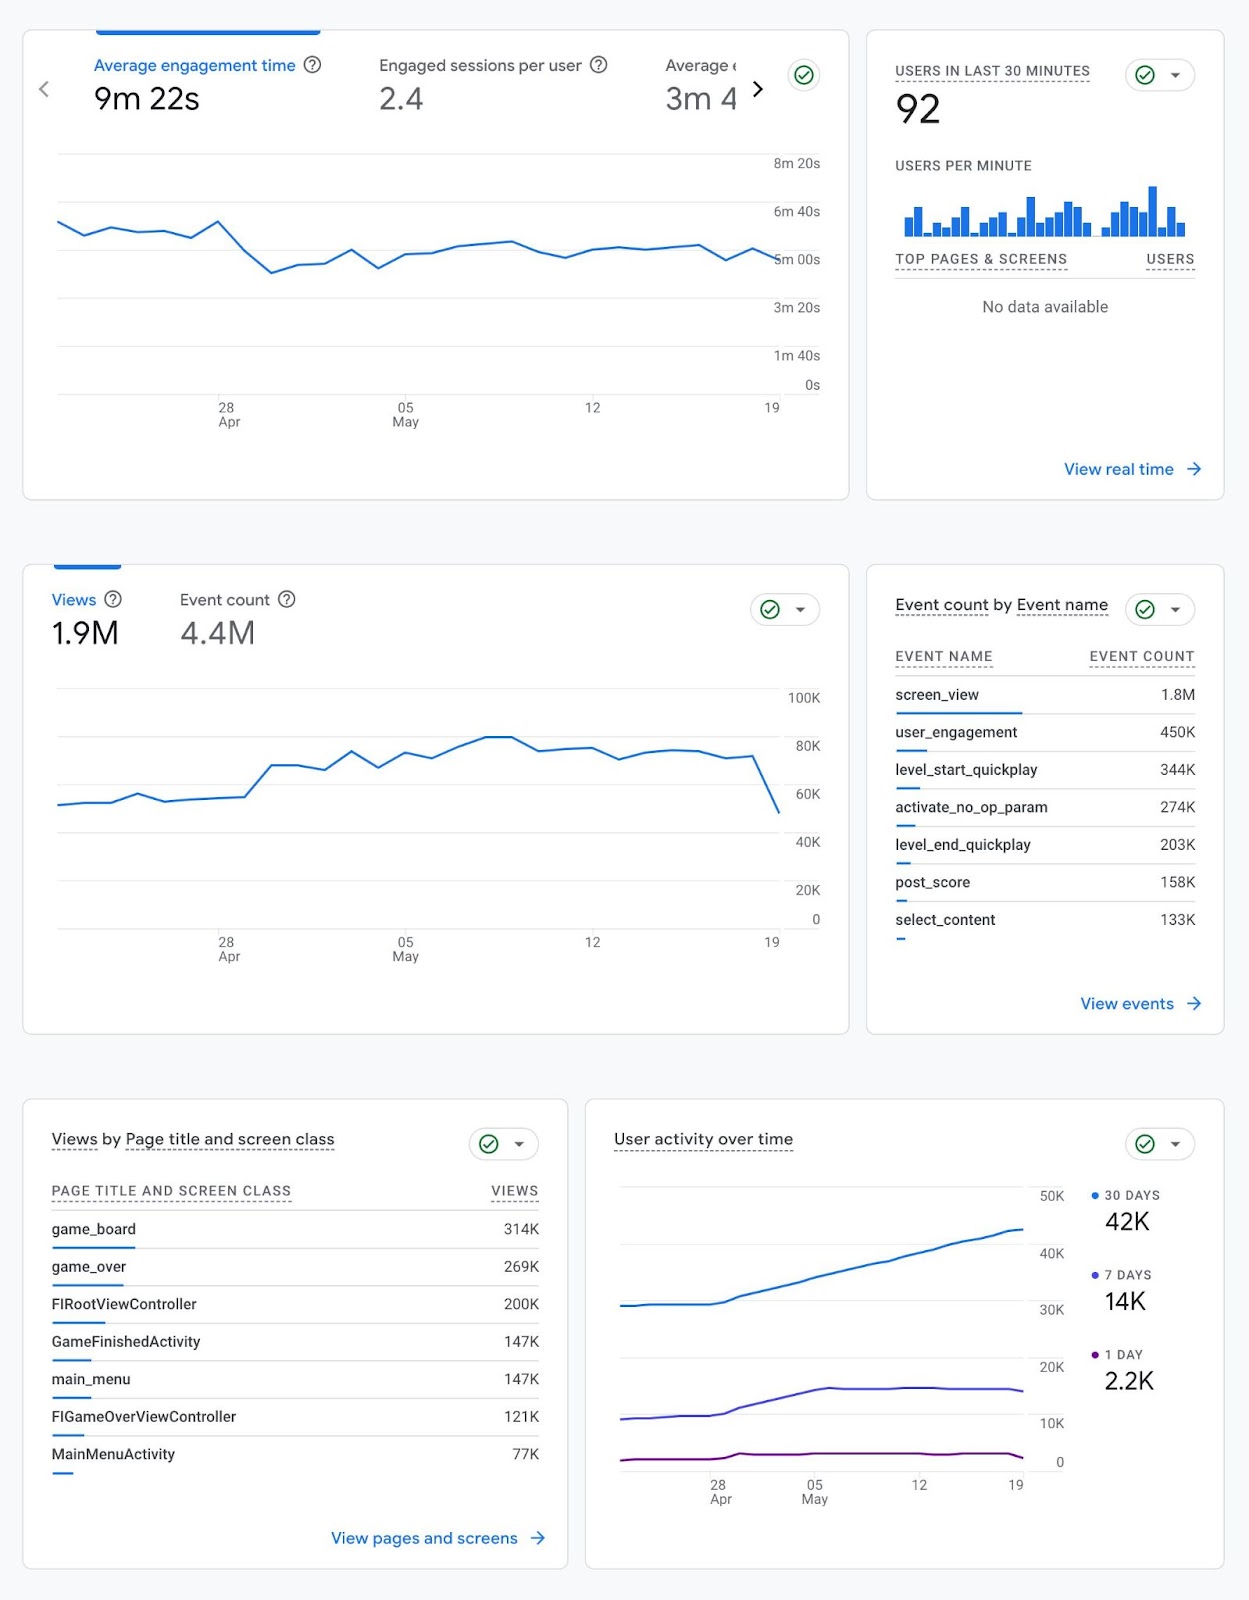 "Audience Overview" on Google Analytics showing engagement, view, event and user metrics.